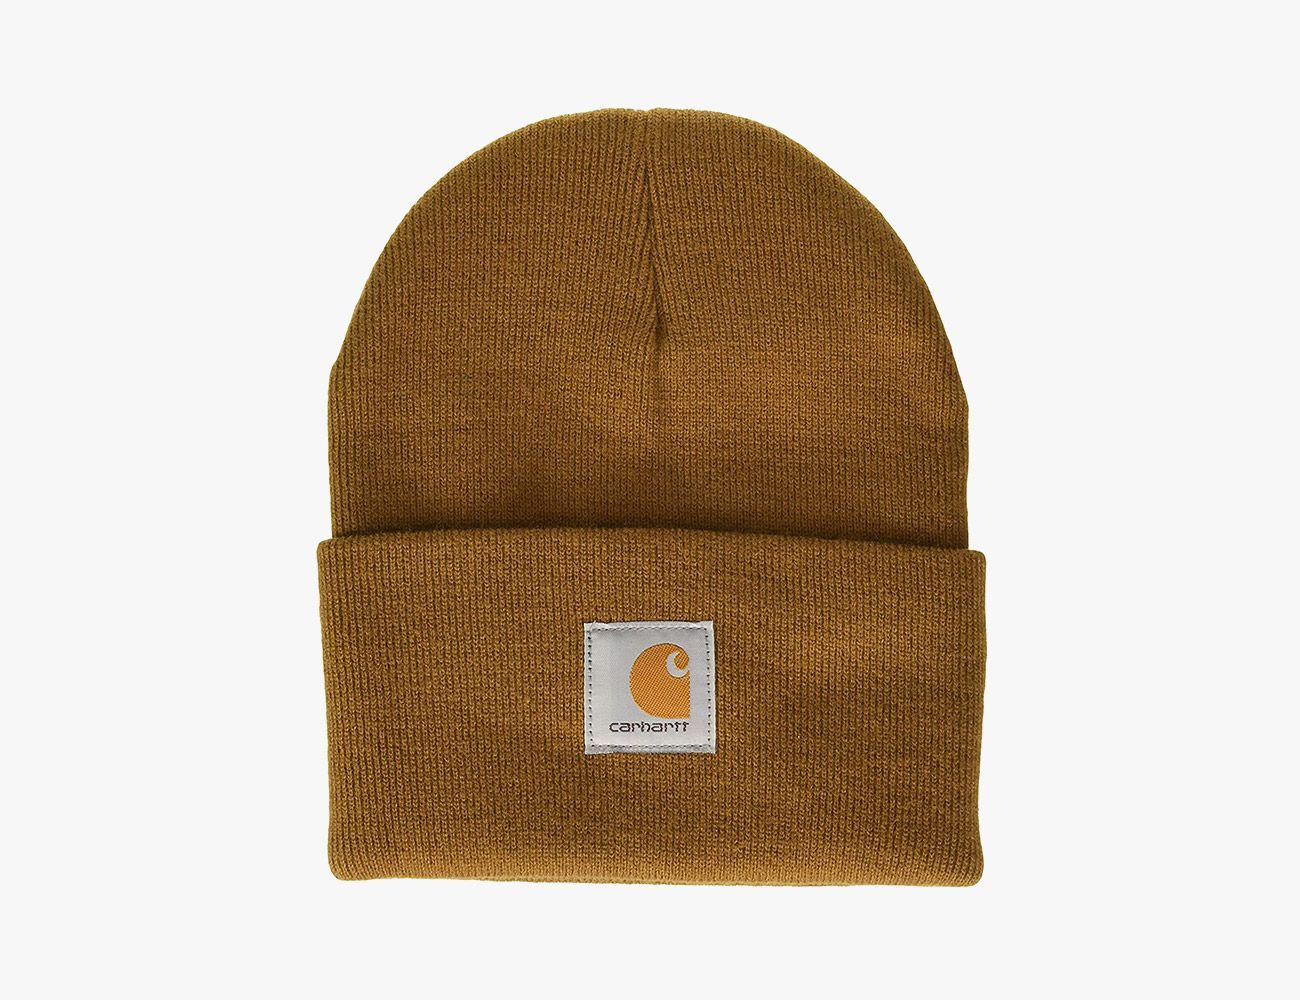 indstudering Matematik squat Carhartt's Most Popular Product is This Basic Beanie